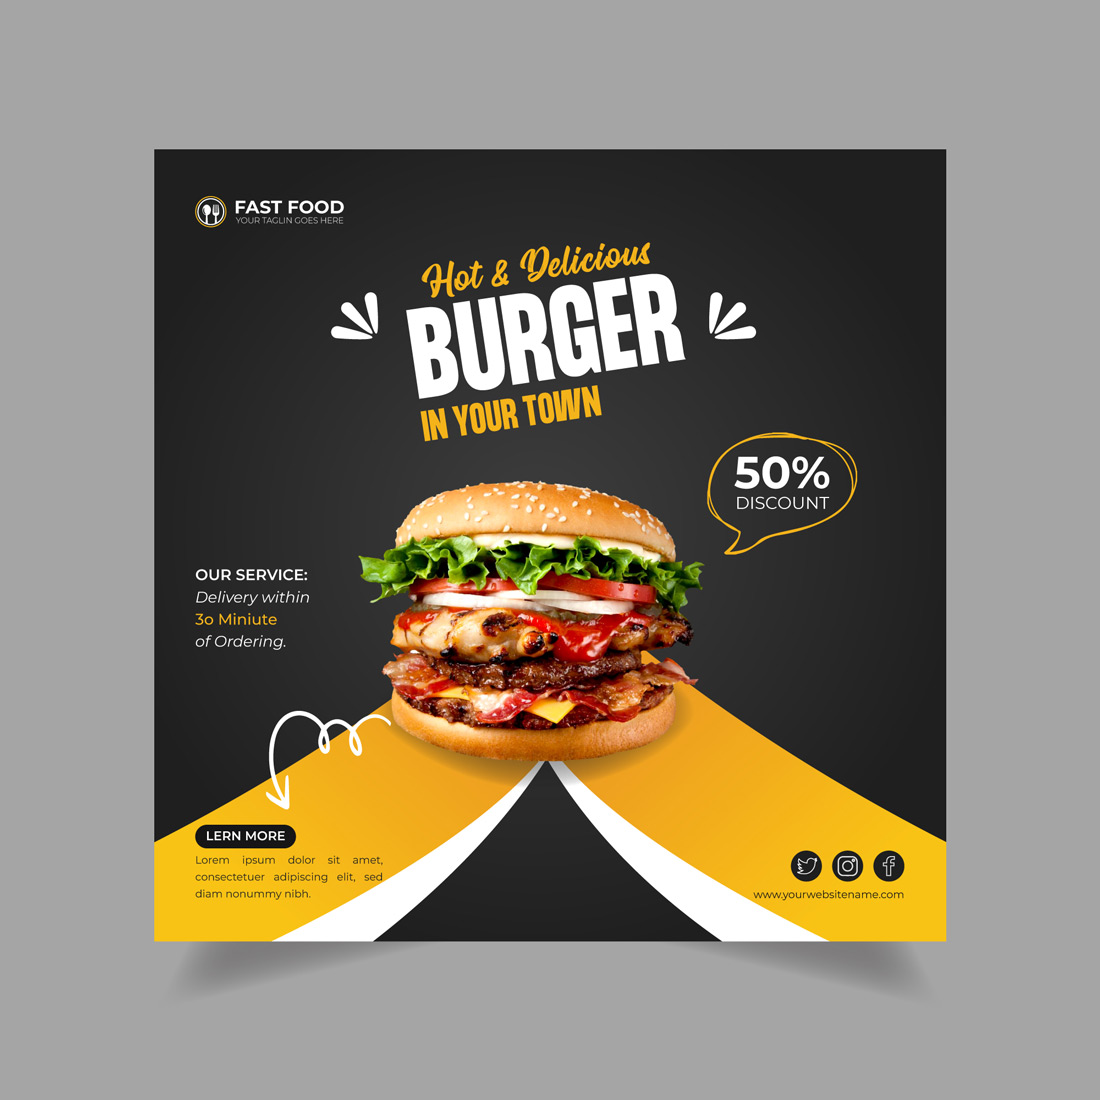 Food and restaurant social media Banner post template only-$2 cover image.